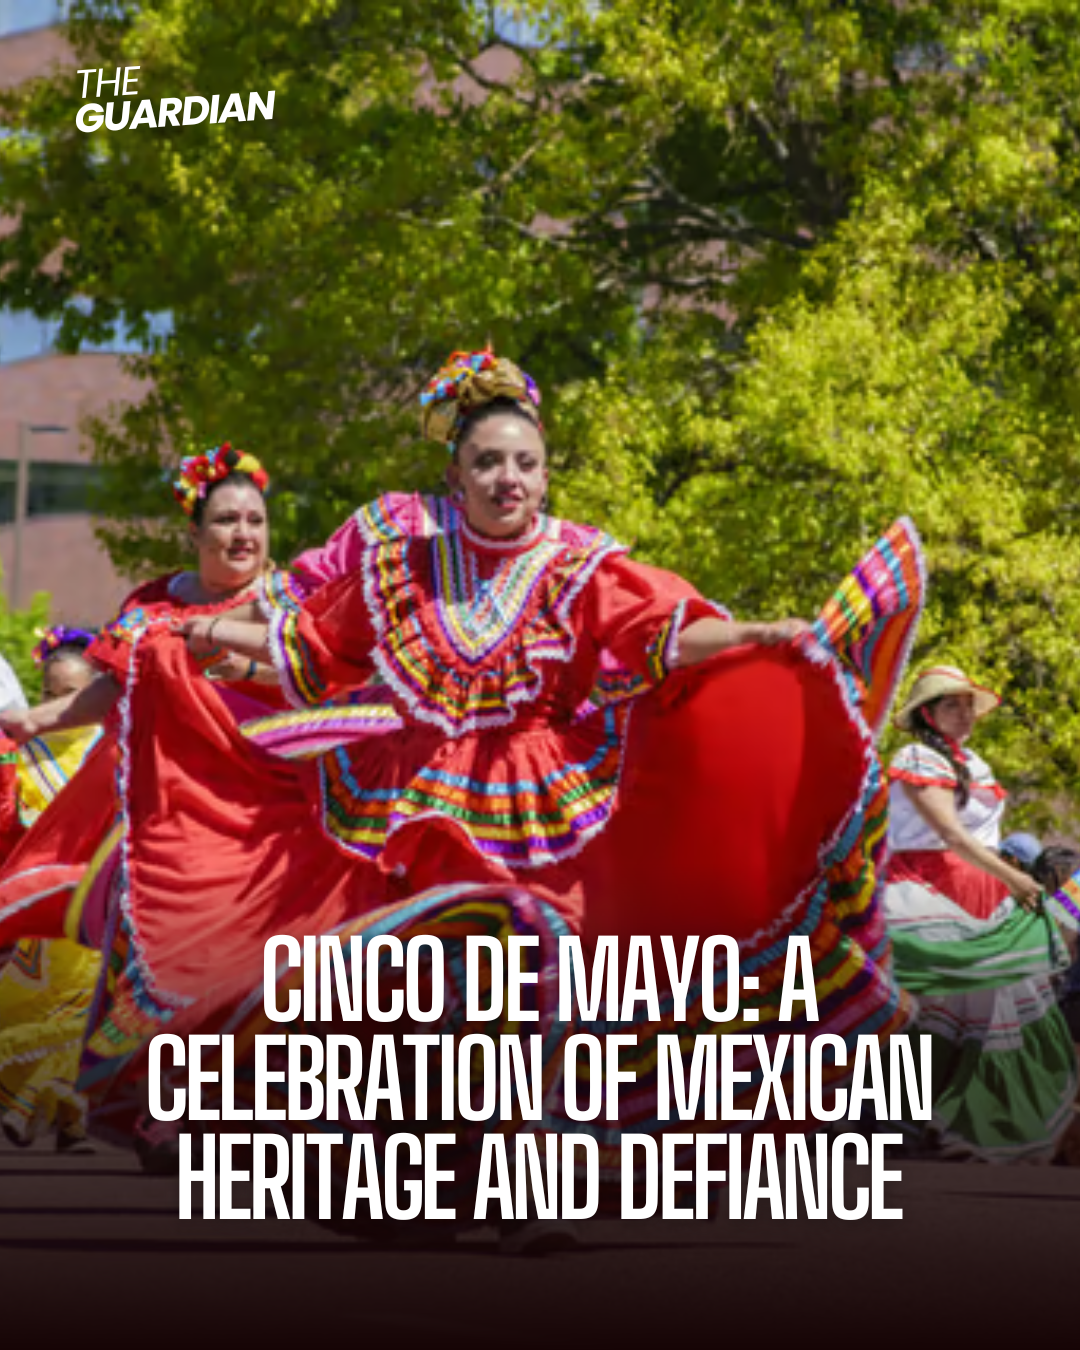 Cinco de Mayo is often confused with Mexico's Independence Day, but it really honours the victory of the War of Puebla.